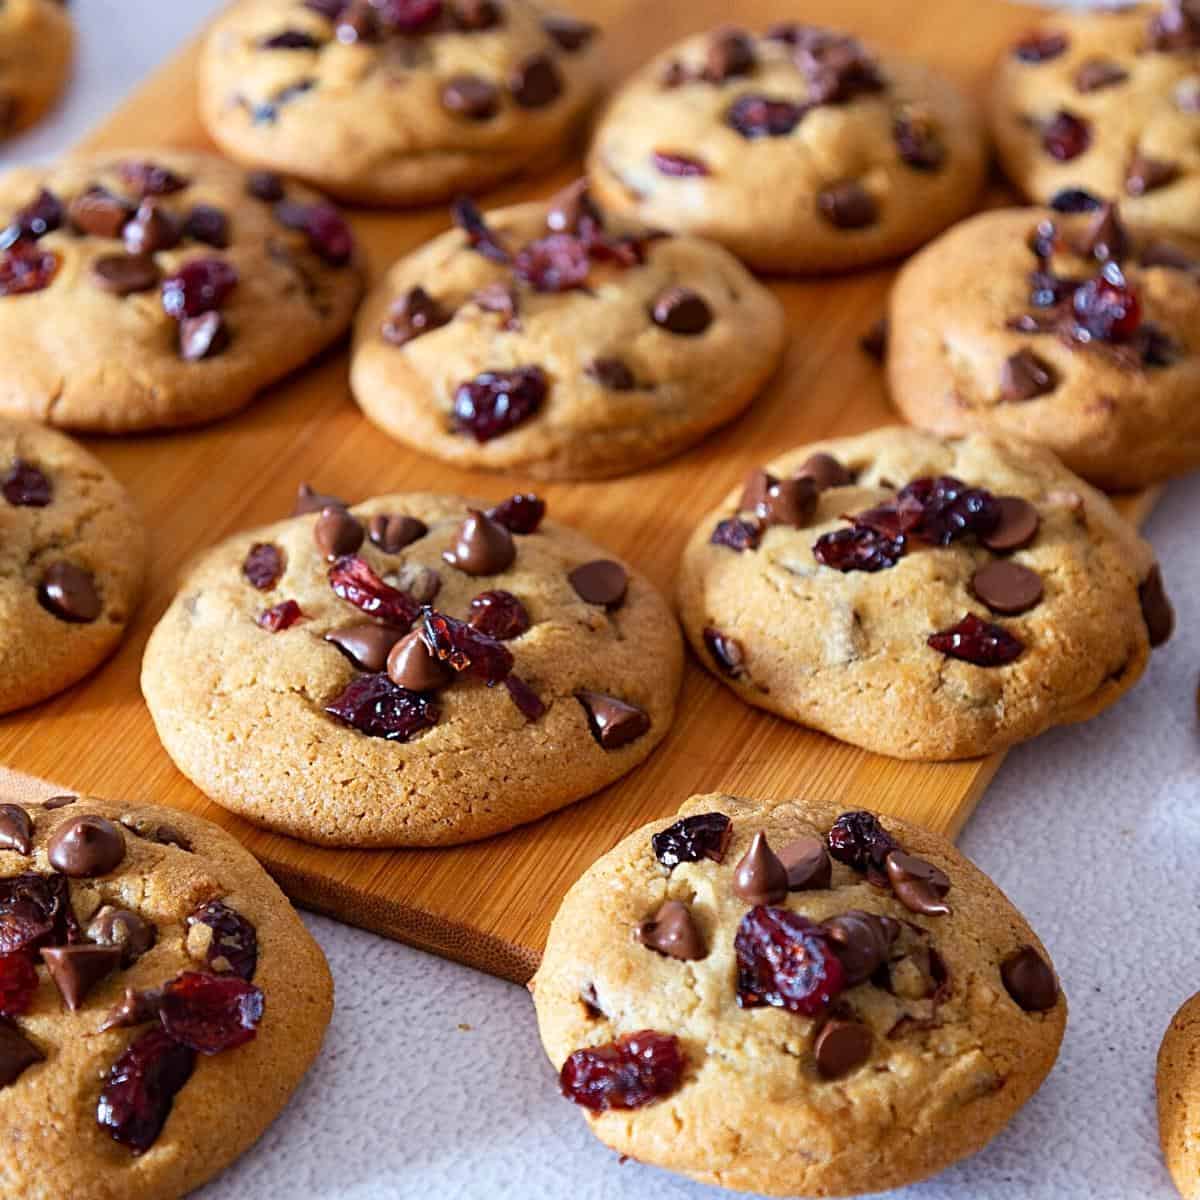 Cookies on a wooden board with chocolate and cranberries.